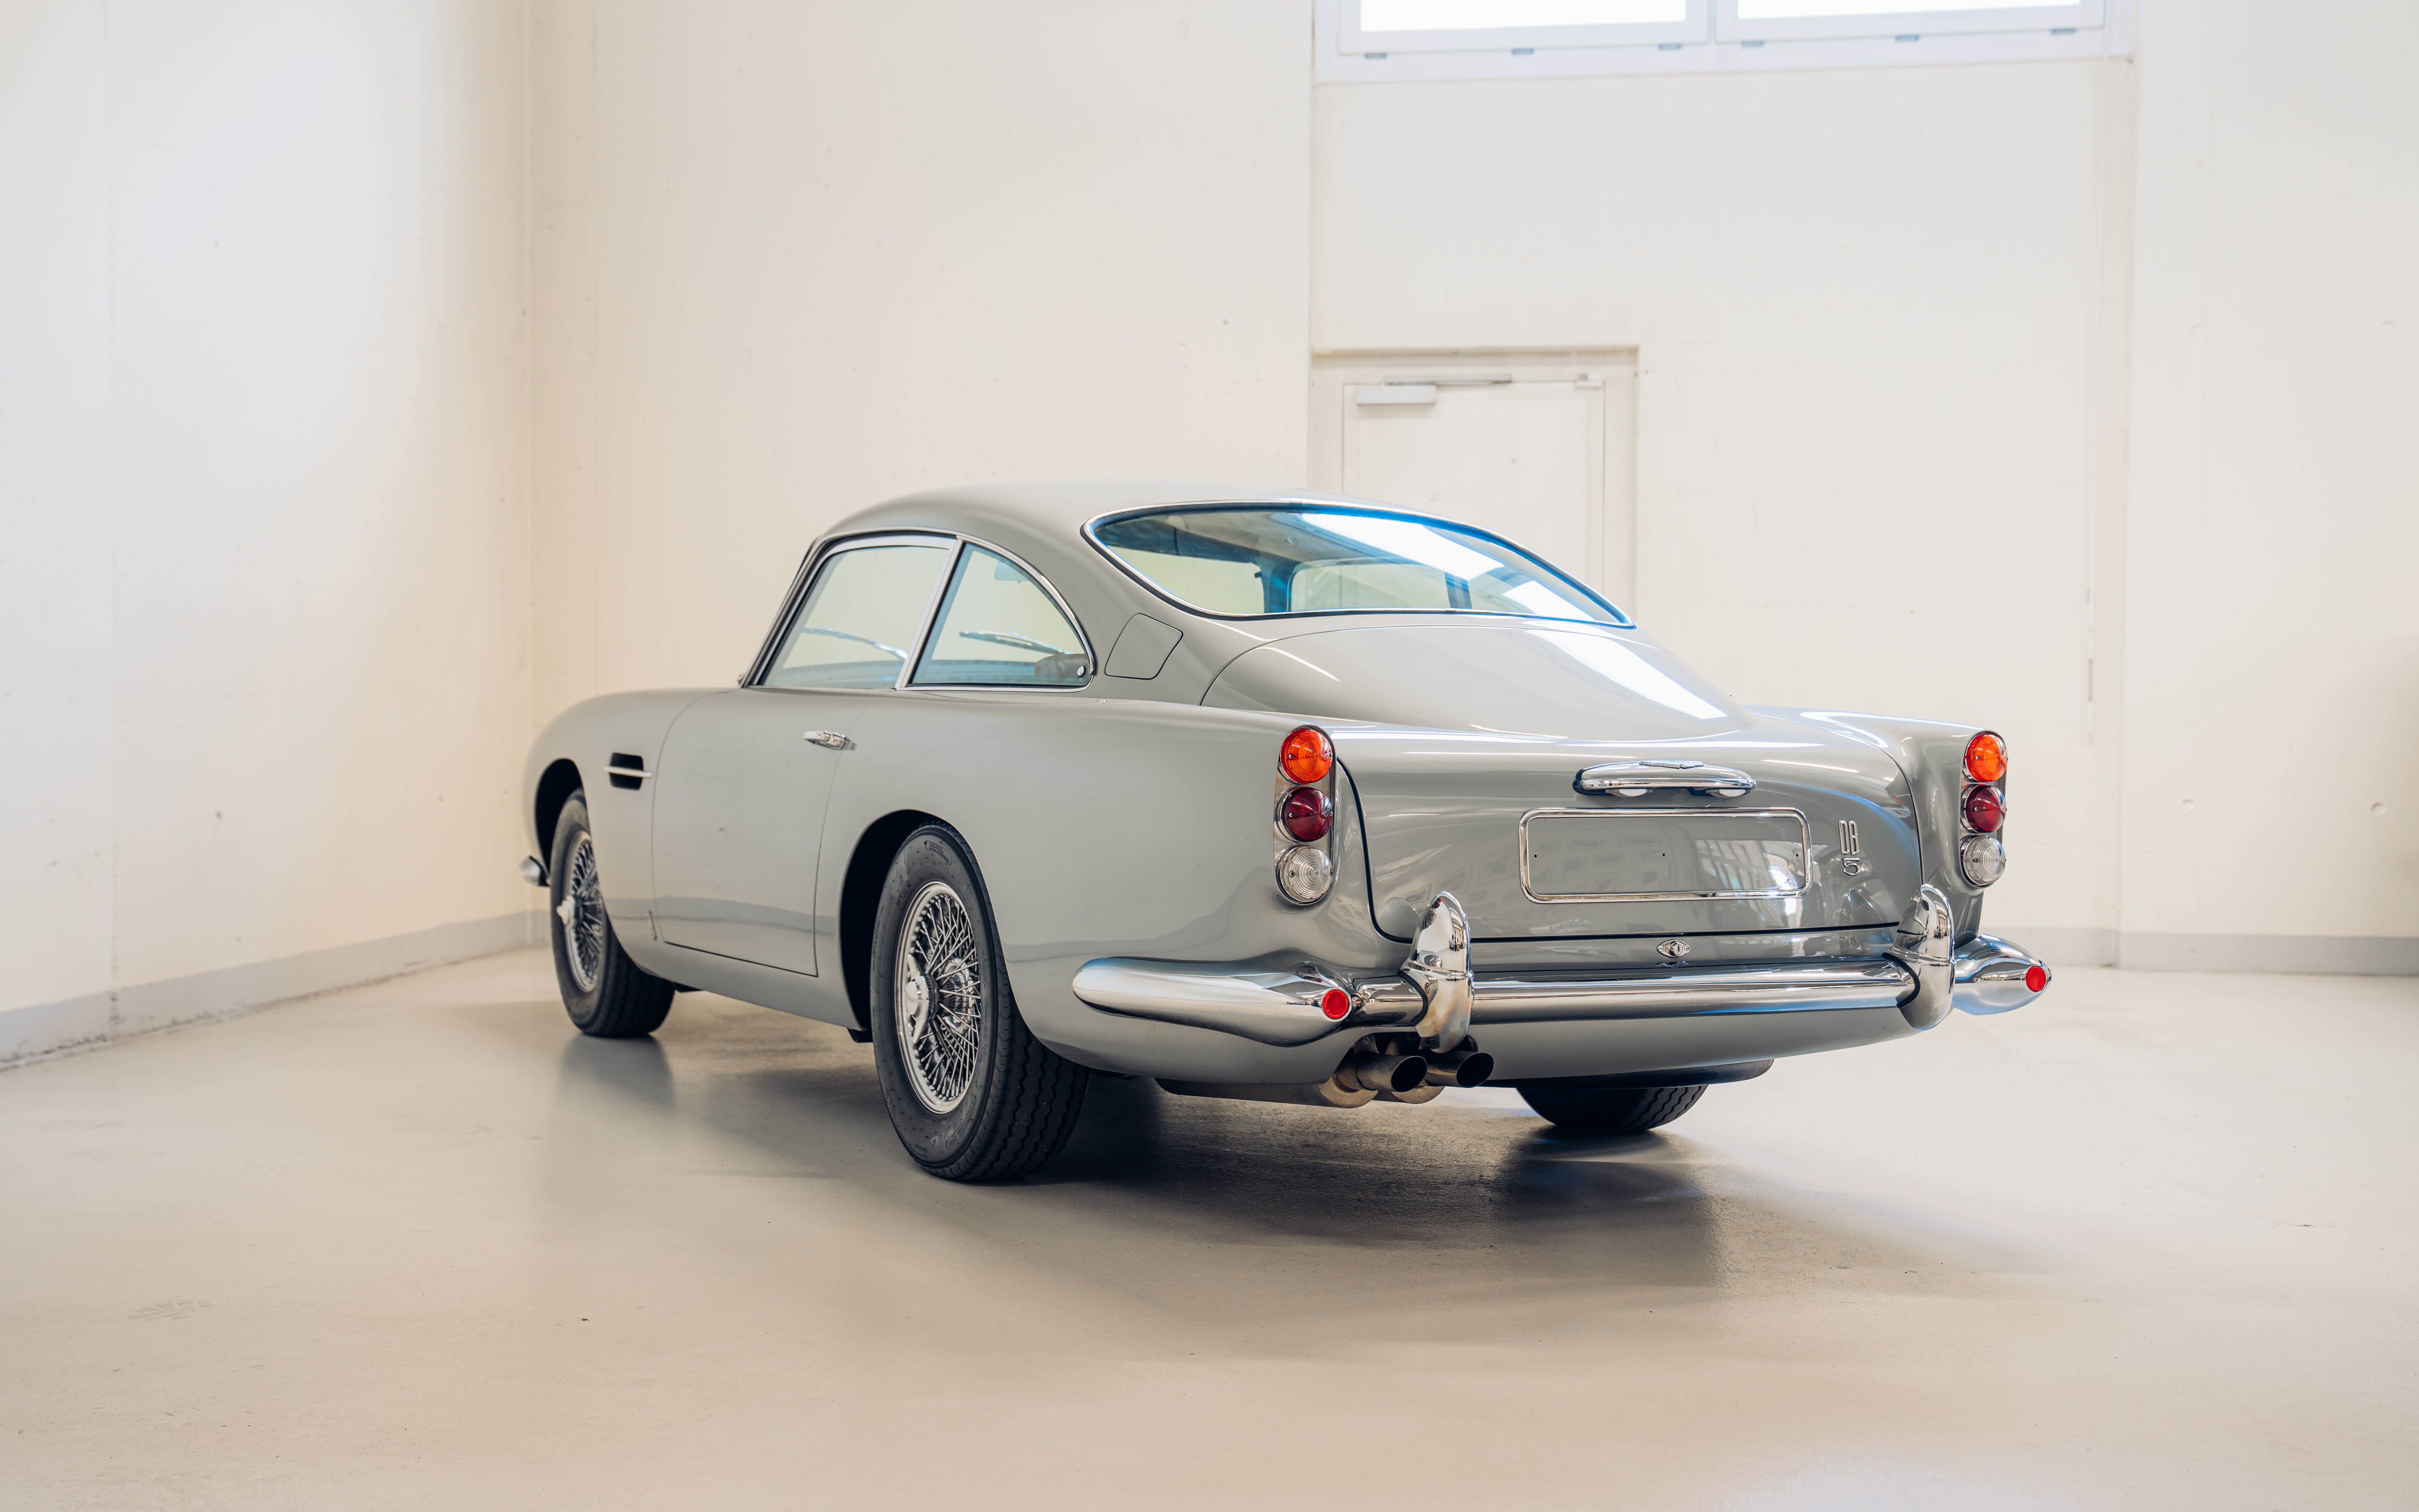 Sir Sean Connery’s Aston Martin DB5 sold for £1.9m (Broad Arrow Group/PA)